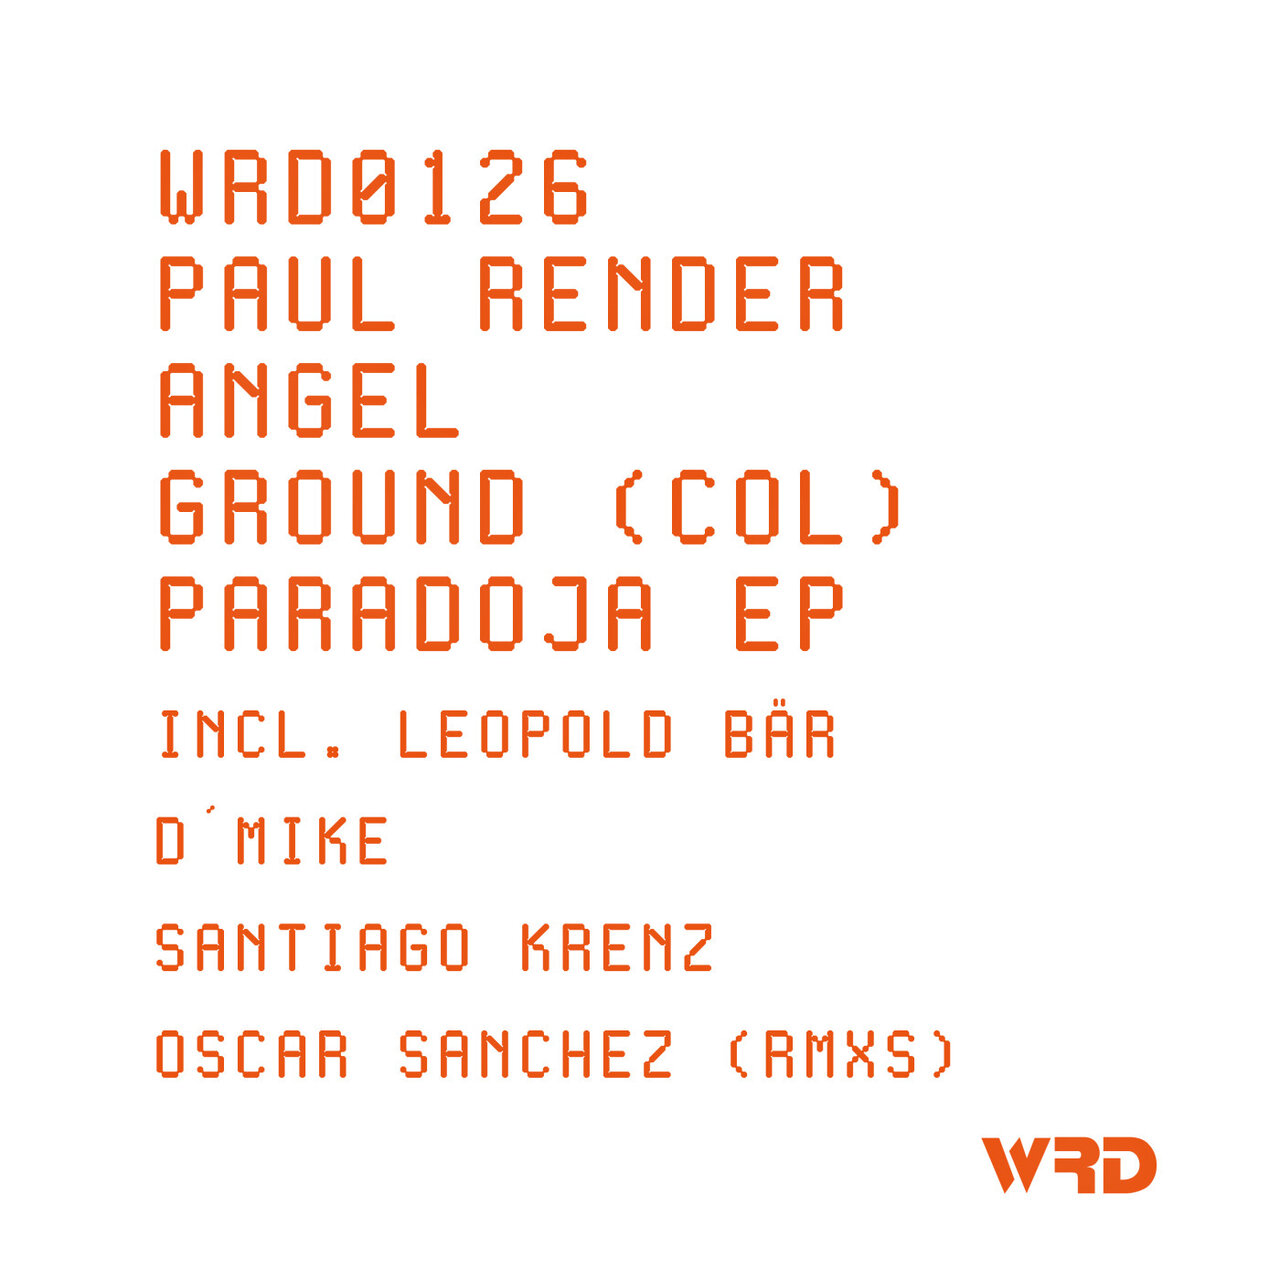 image cover: Paul Render, AngelGround (Col) - Paradoja EP on WRD Records